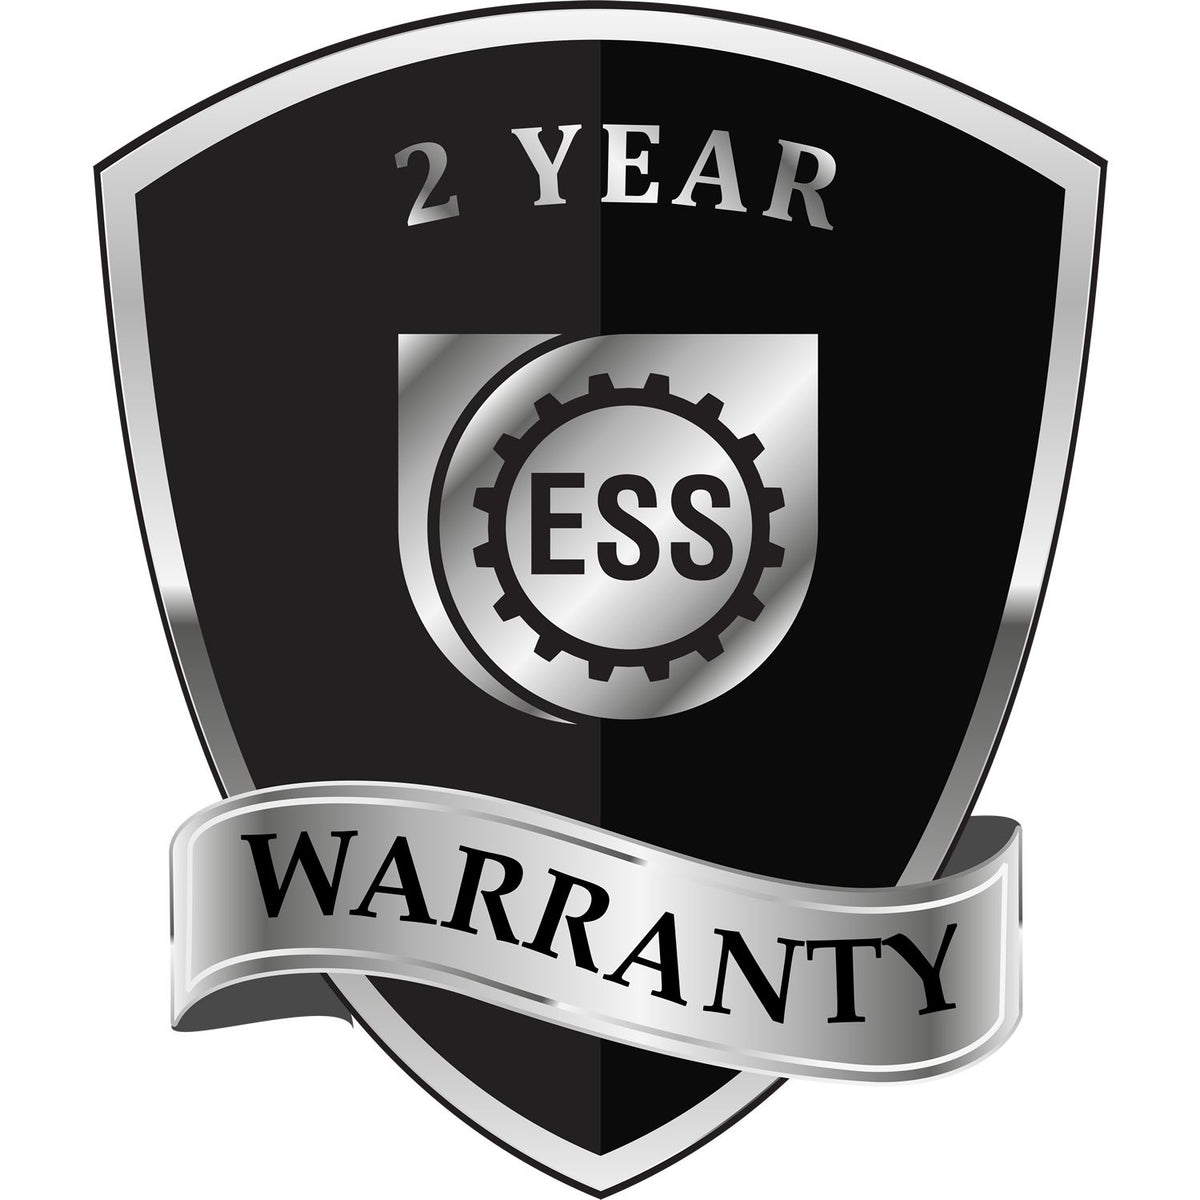 A black and silver badge or emblem showing warranty information for the Hybrid District of Columbia Geologist Seal